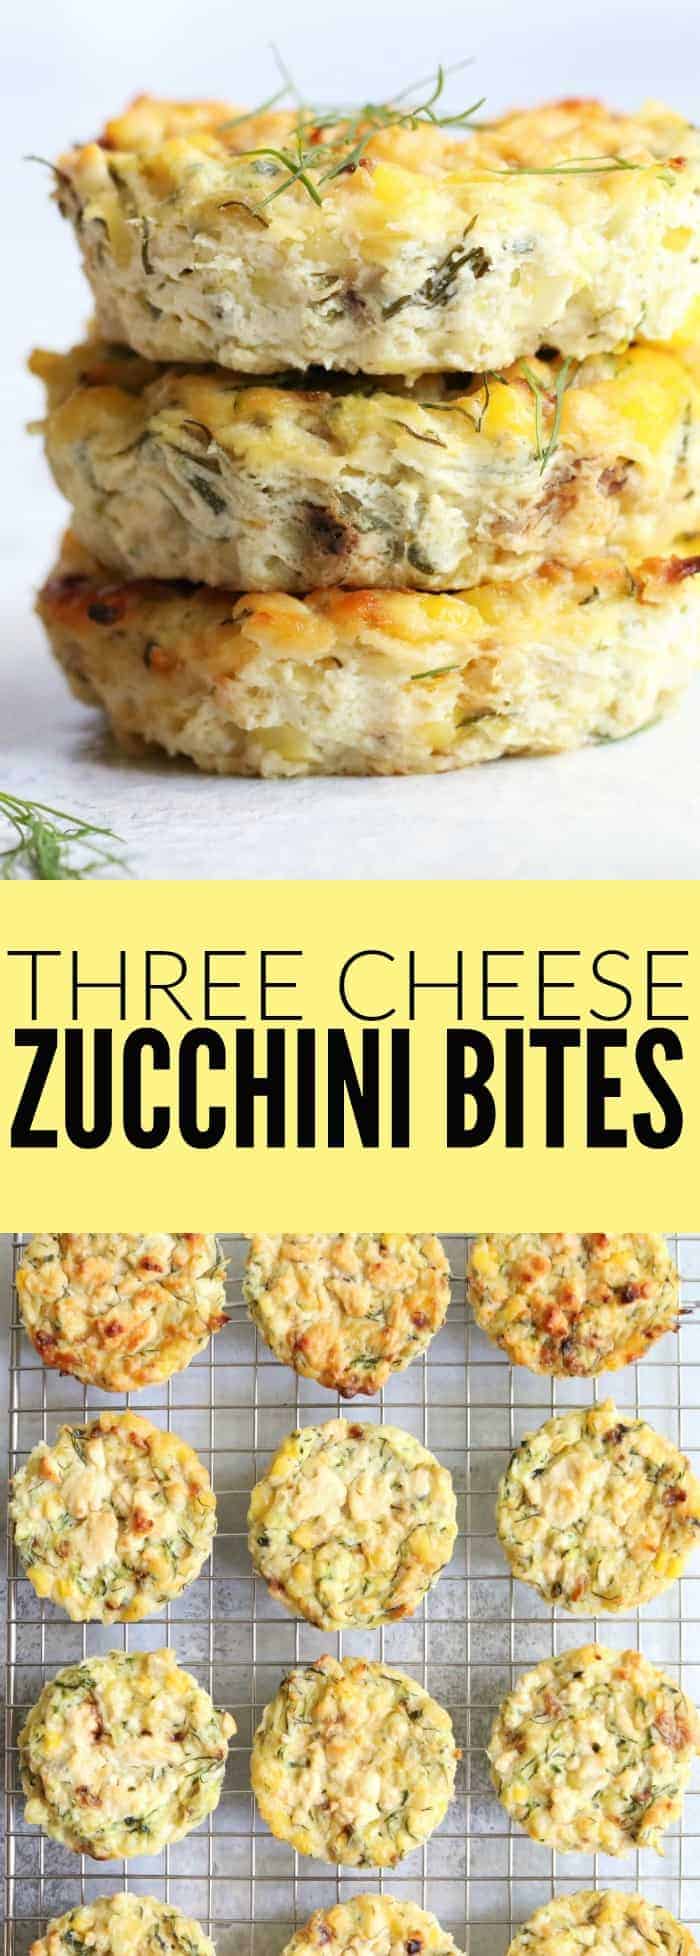 Flavorful Three Cheese Zucchini Bites that are low carb, gluten free, and so delicious! You'll love these little quiche tarts packed with summer veggies! thetoastedpinenut.com